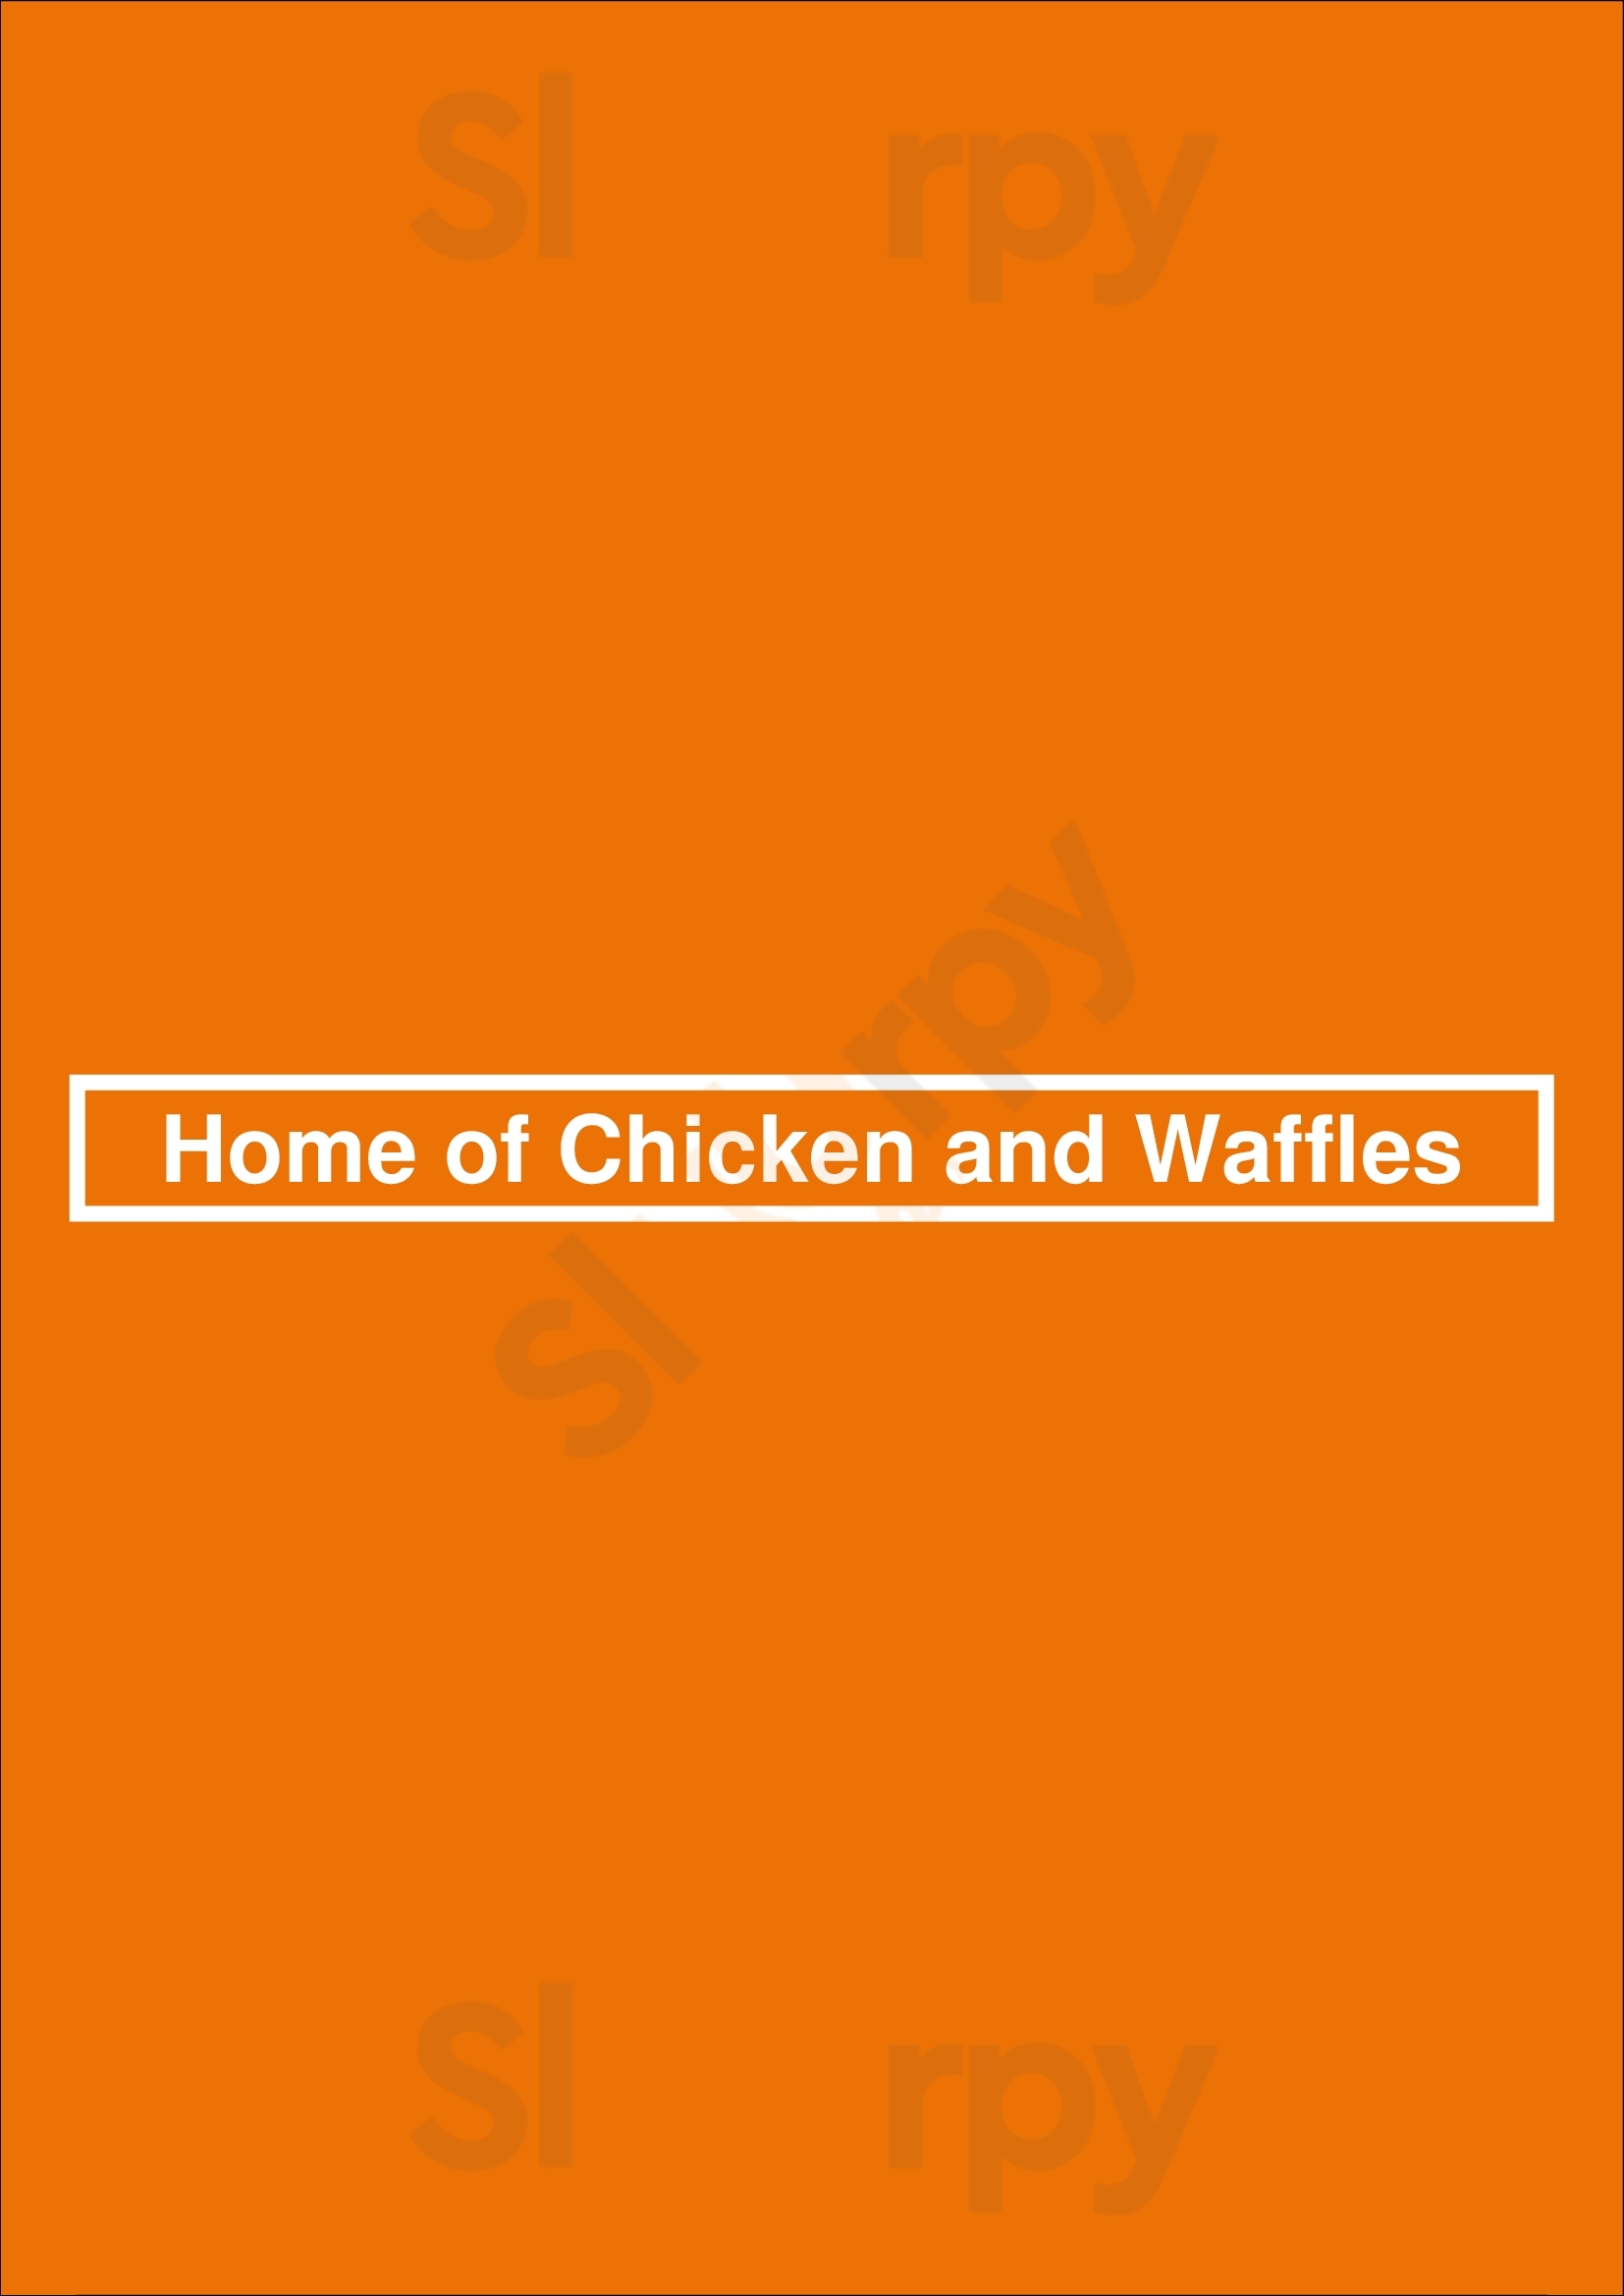 Home Of Chicken And Waffles Oakland Menu - 1